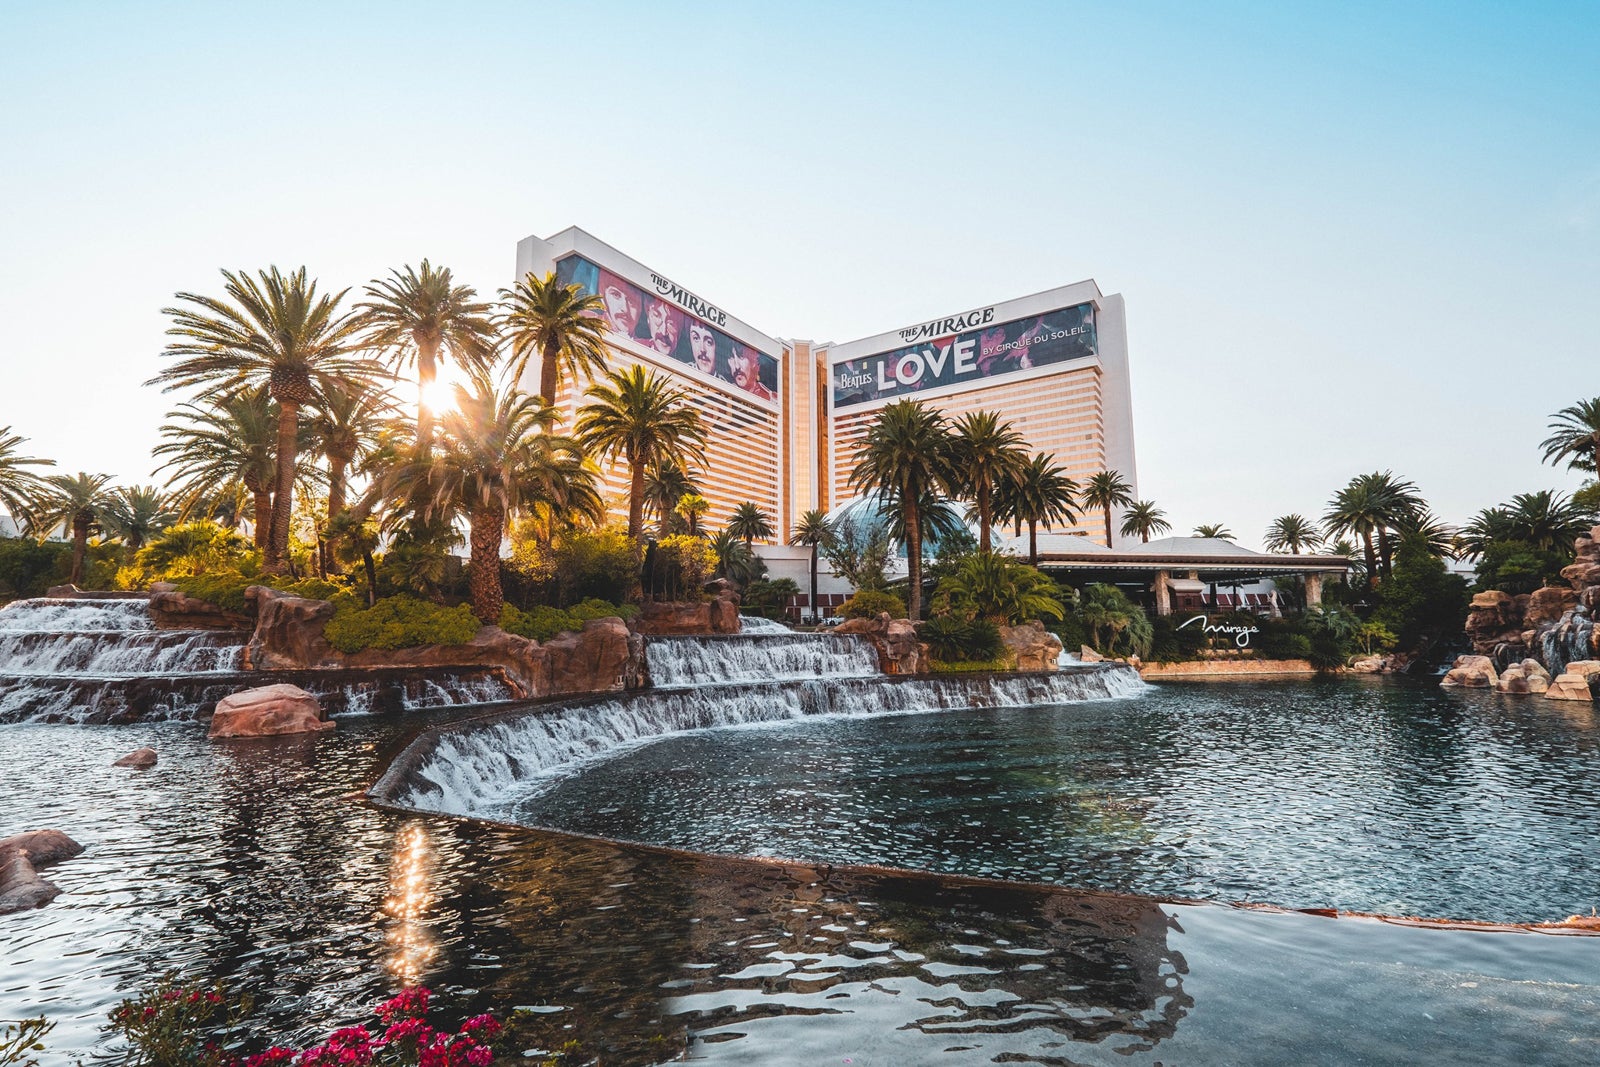 The 3 Las Vegas Hotels With Lazy Rivers in 2023 - Lavish Vegas